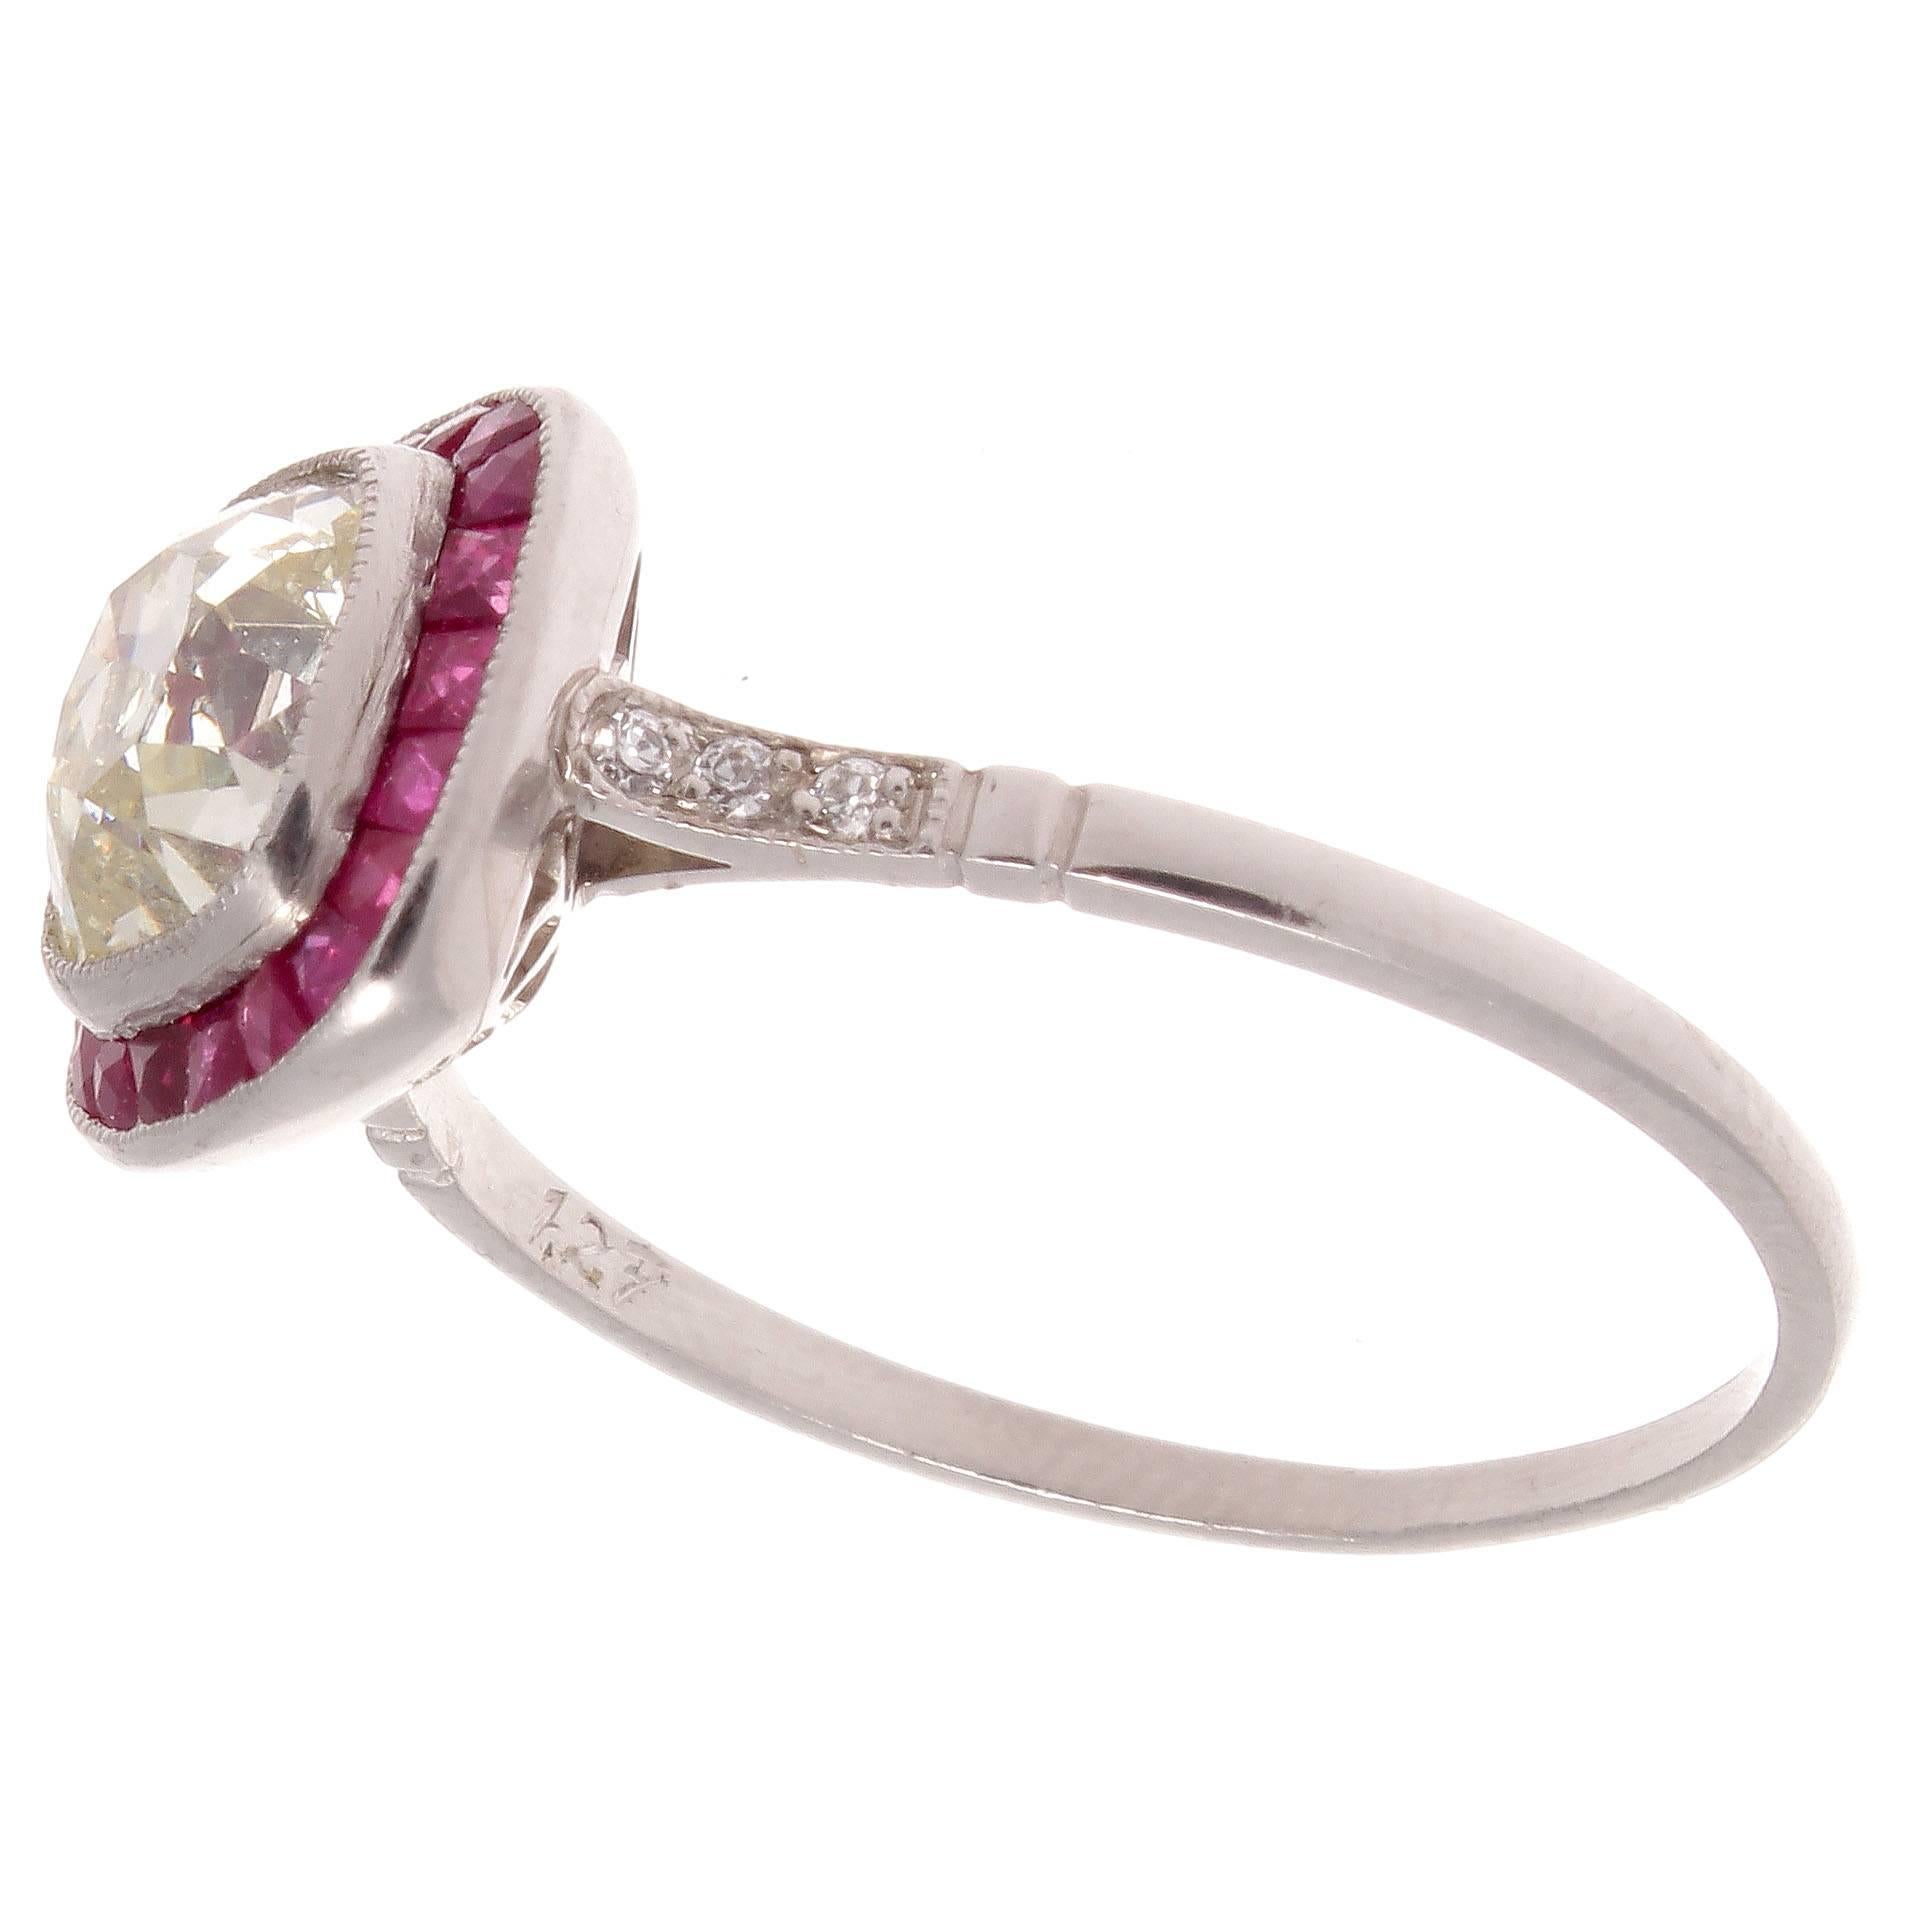 Style from the golden art deco era of jewelry has inspired this unique rendition of the traditional engagement ring. Featuring a 1.27 carat old cushion cut diamond that is surrounded by an untraditional halo of vibrant red rubies making the diamond